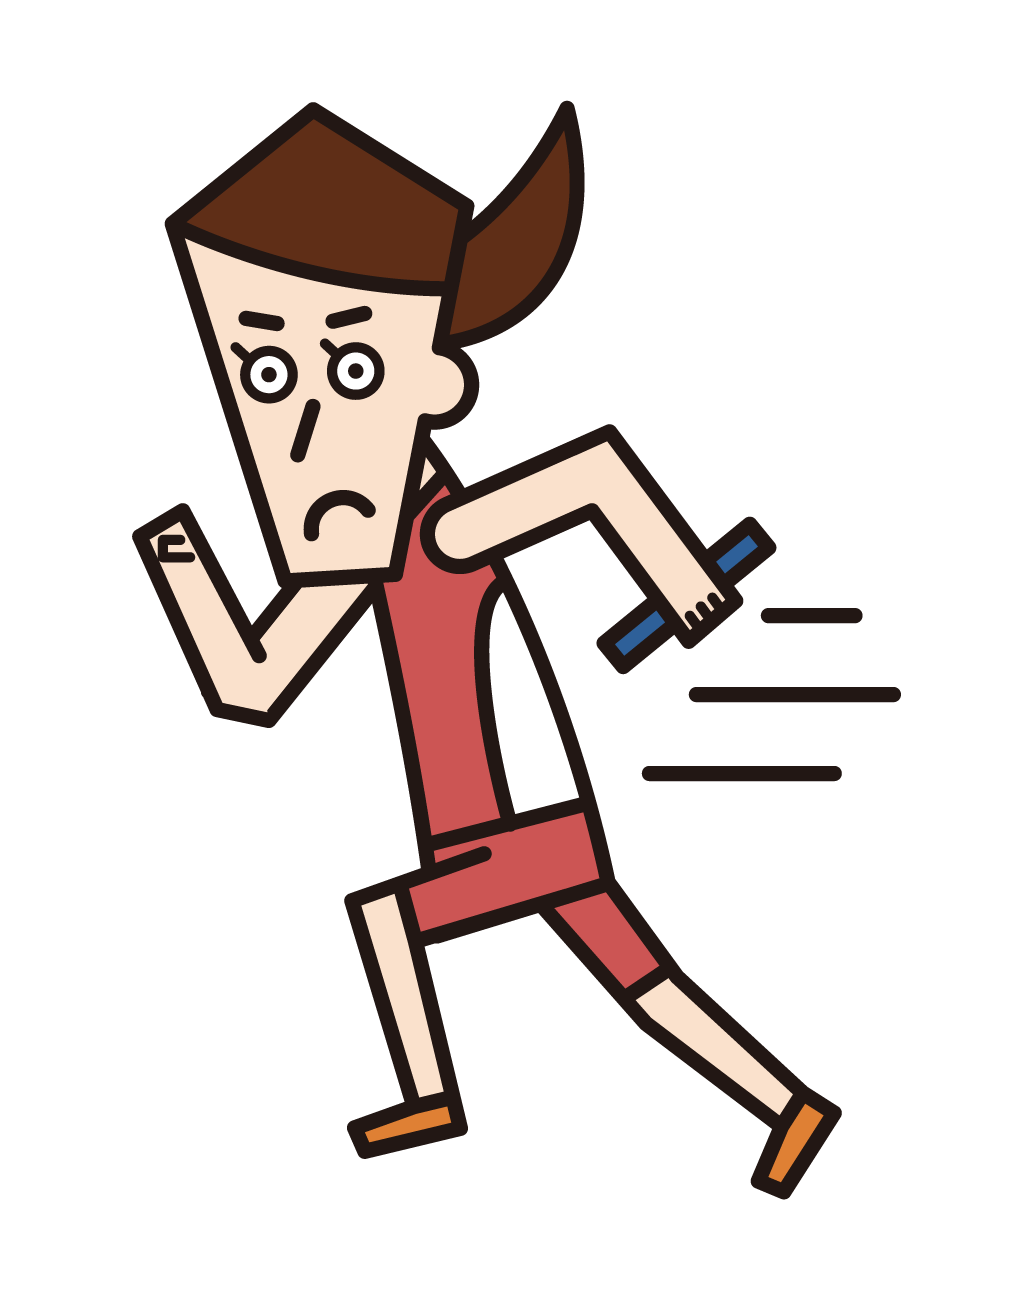 Illustration of a relay runner (male)